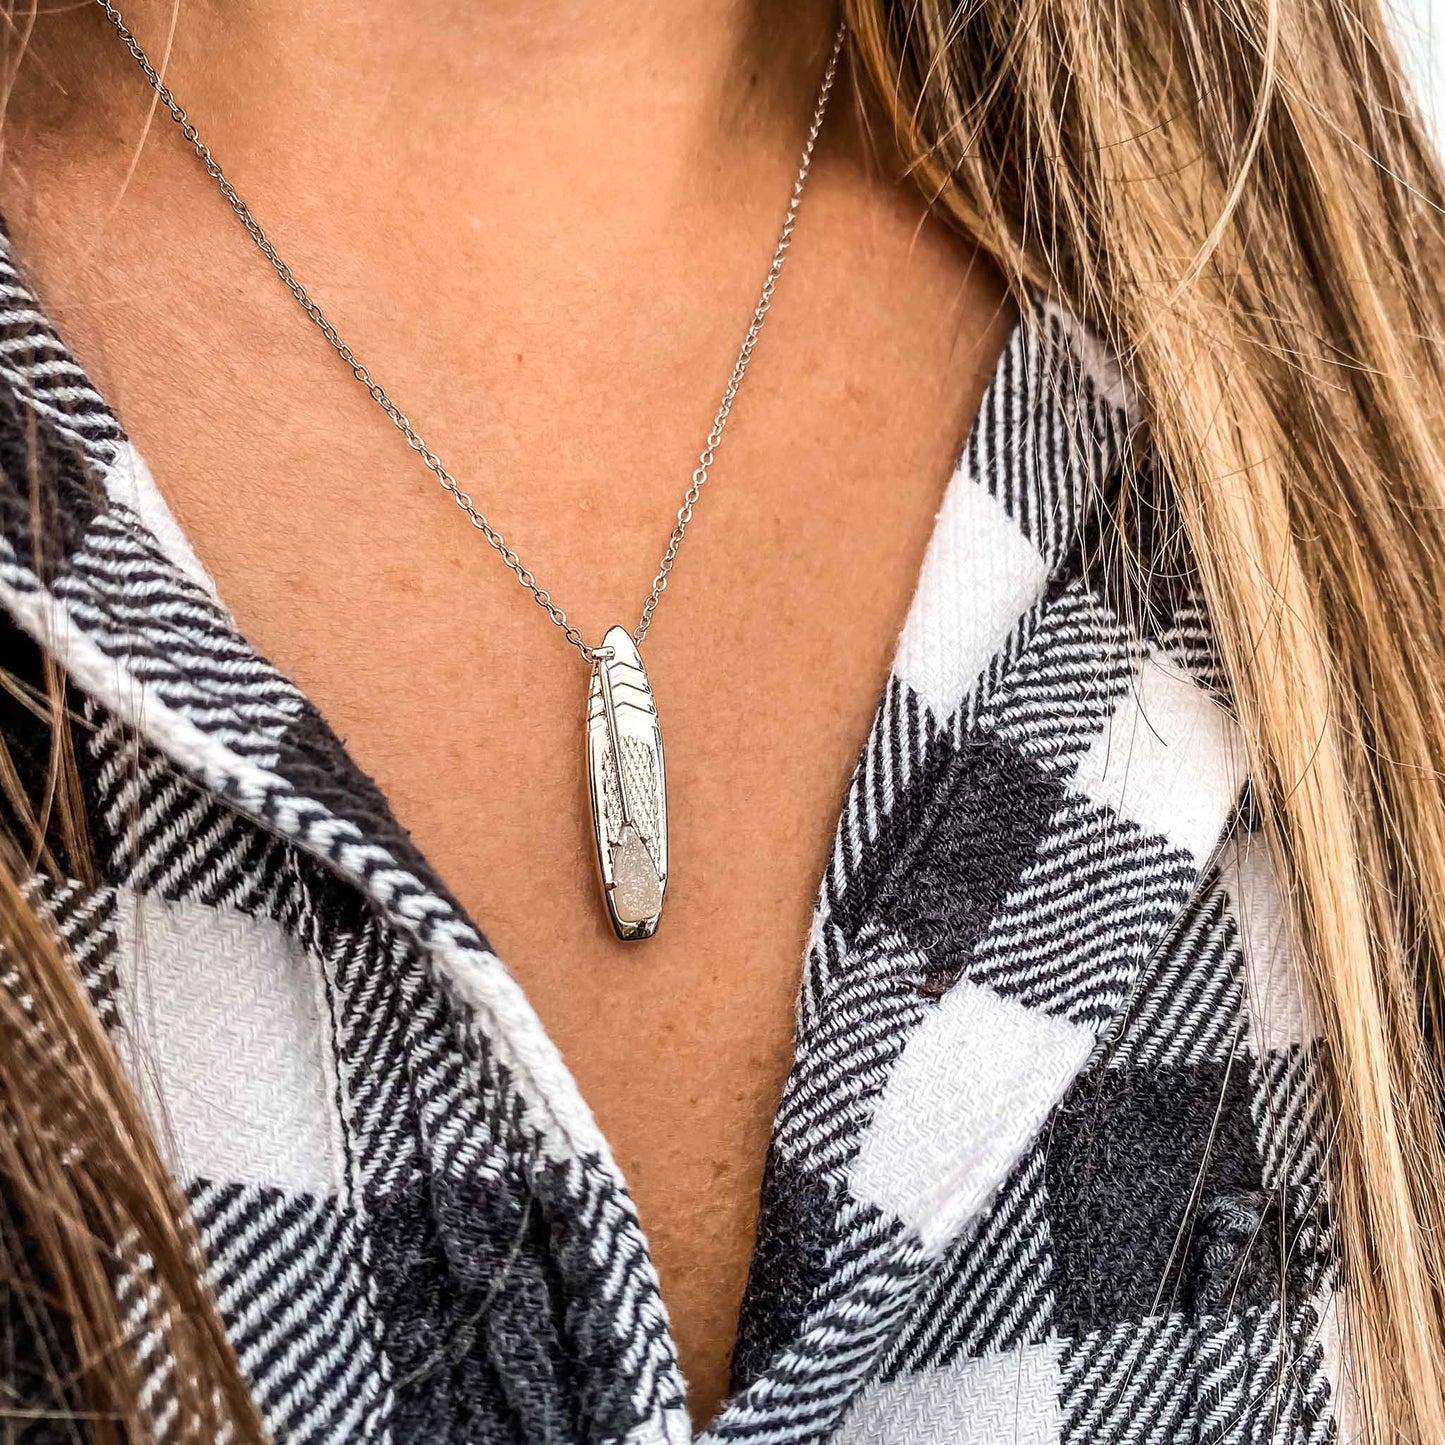 APRIL Birthstone SUP jewelry Necklace in  Quartz Crystal-Born to Rock Jewelry - Looking for places to buy or rent a paddle board? This stand up paddle board pendant will be the best and highest performance SUP you'll ever find. Take your paddle board with you, even when you're not surfing, racing or touring. Shop April's birthstone SUP jewelry online or at a surf shop near you.